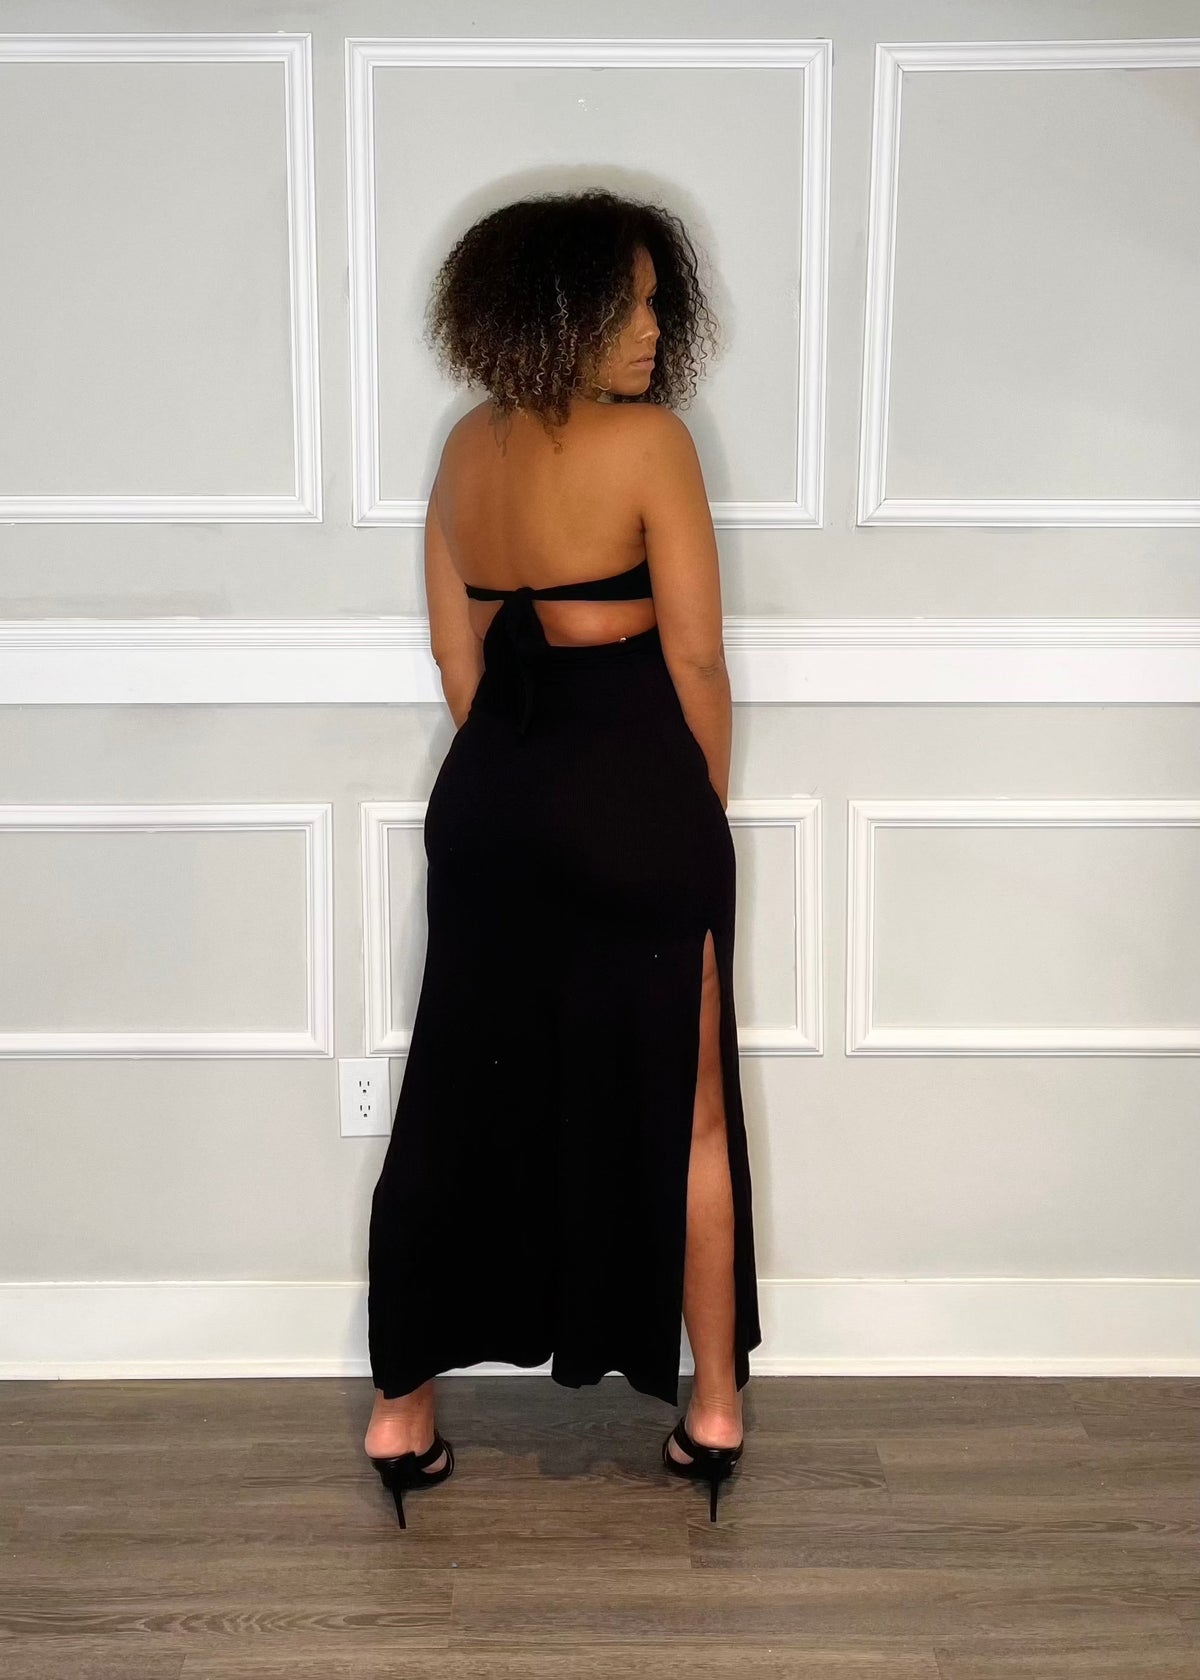 Get trendy with Britt Black Halter Cut-out Maxi Dress - Dresses available at ELLE TENAJ. Grab yours for $35 today!